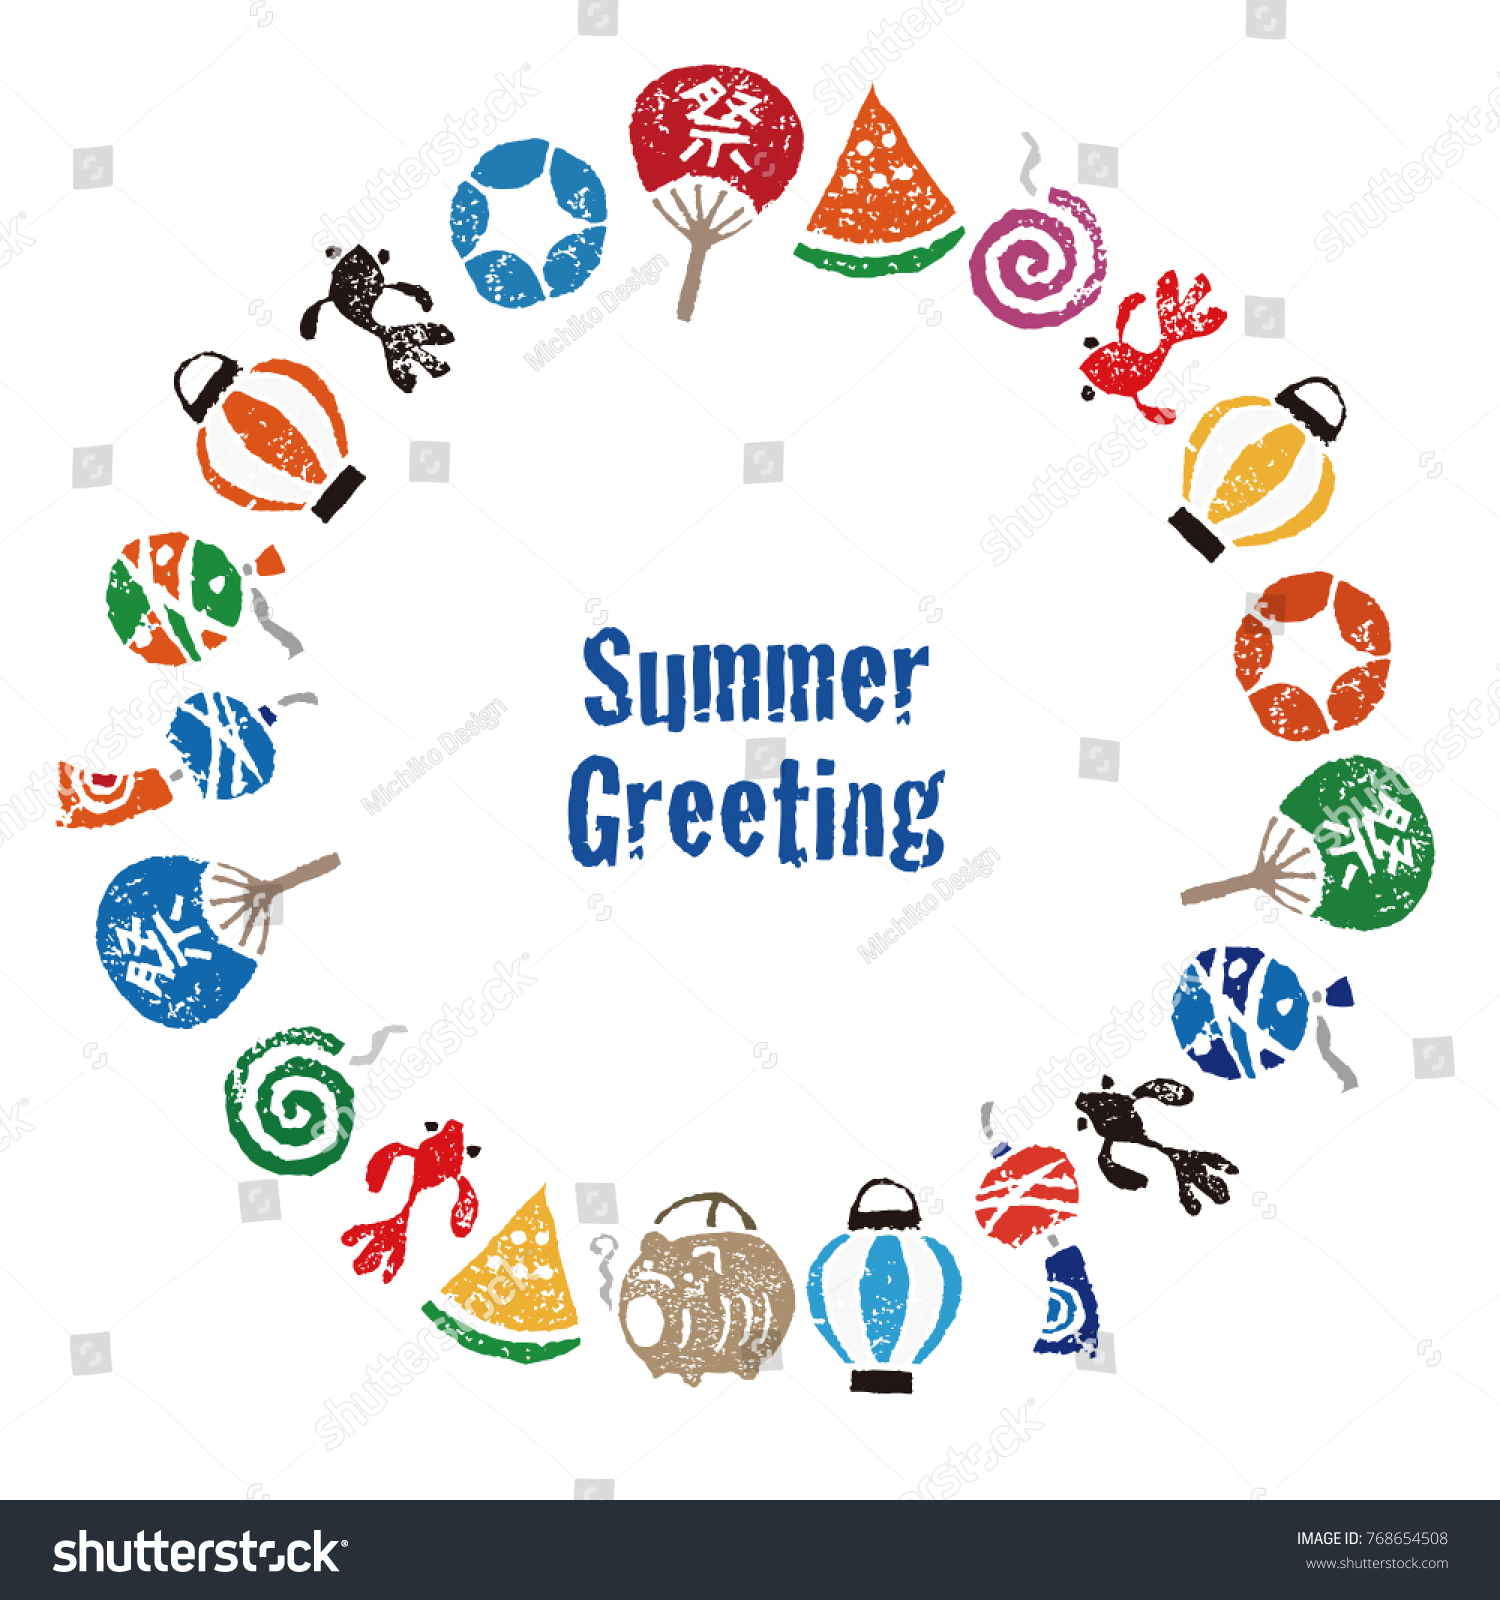 SVG of Summer greeting with Japanese summer elements, watermelon, handfan, wind chime, mosquito coil, goldfish, lantern, morning glory and water yoyo svg